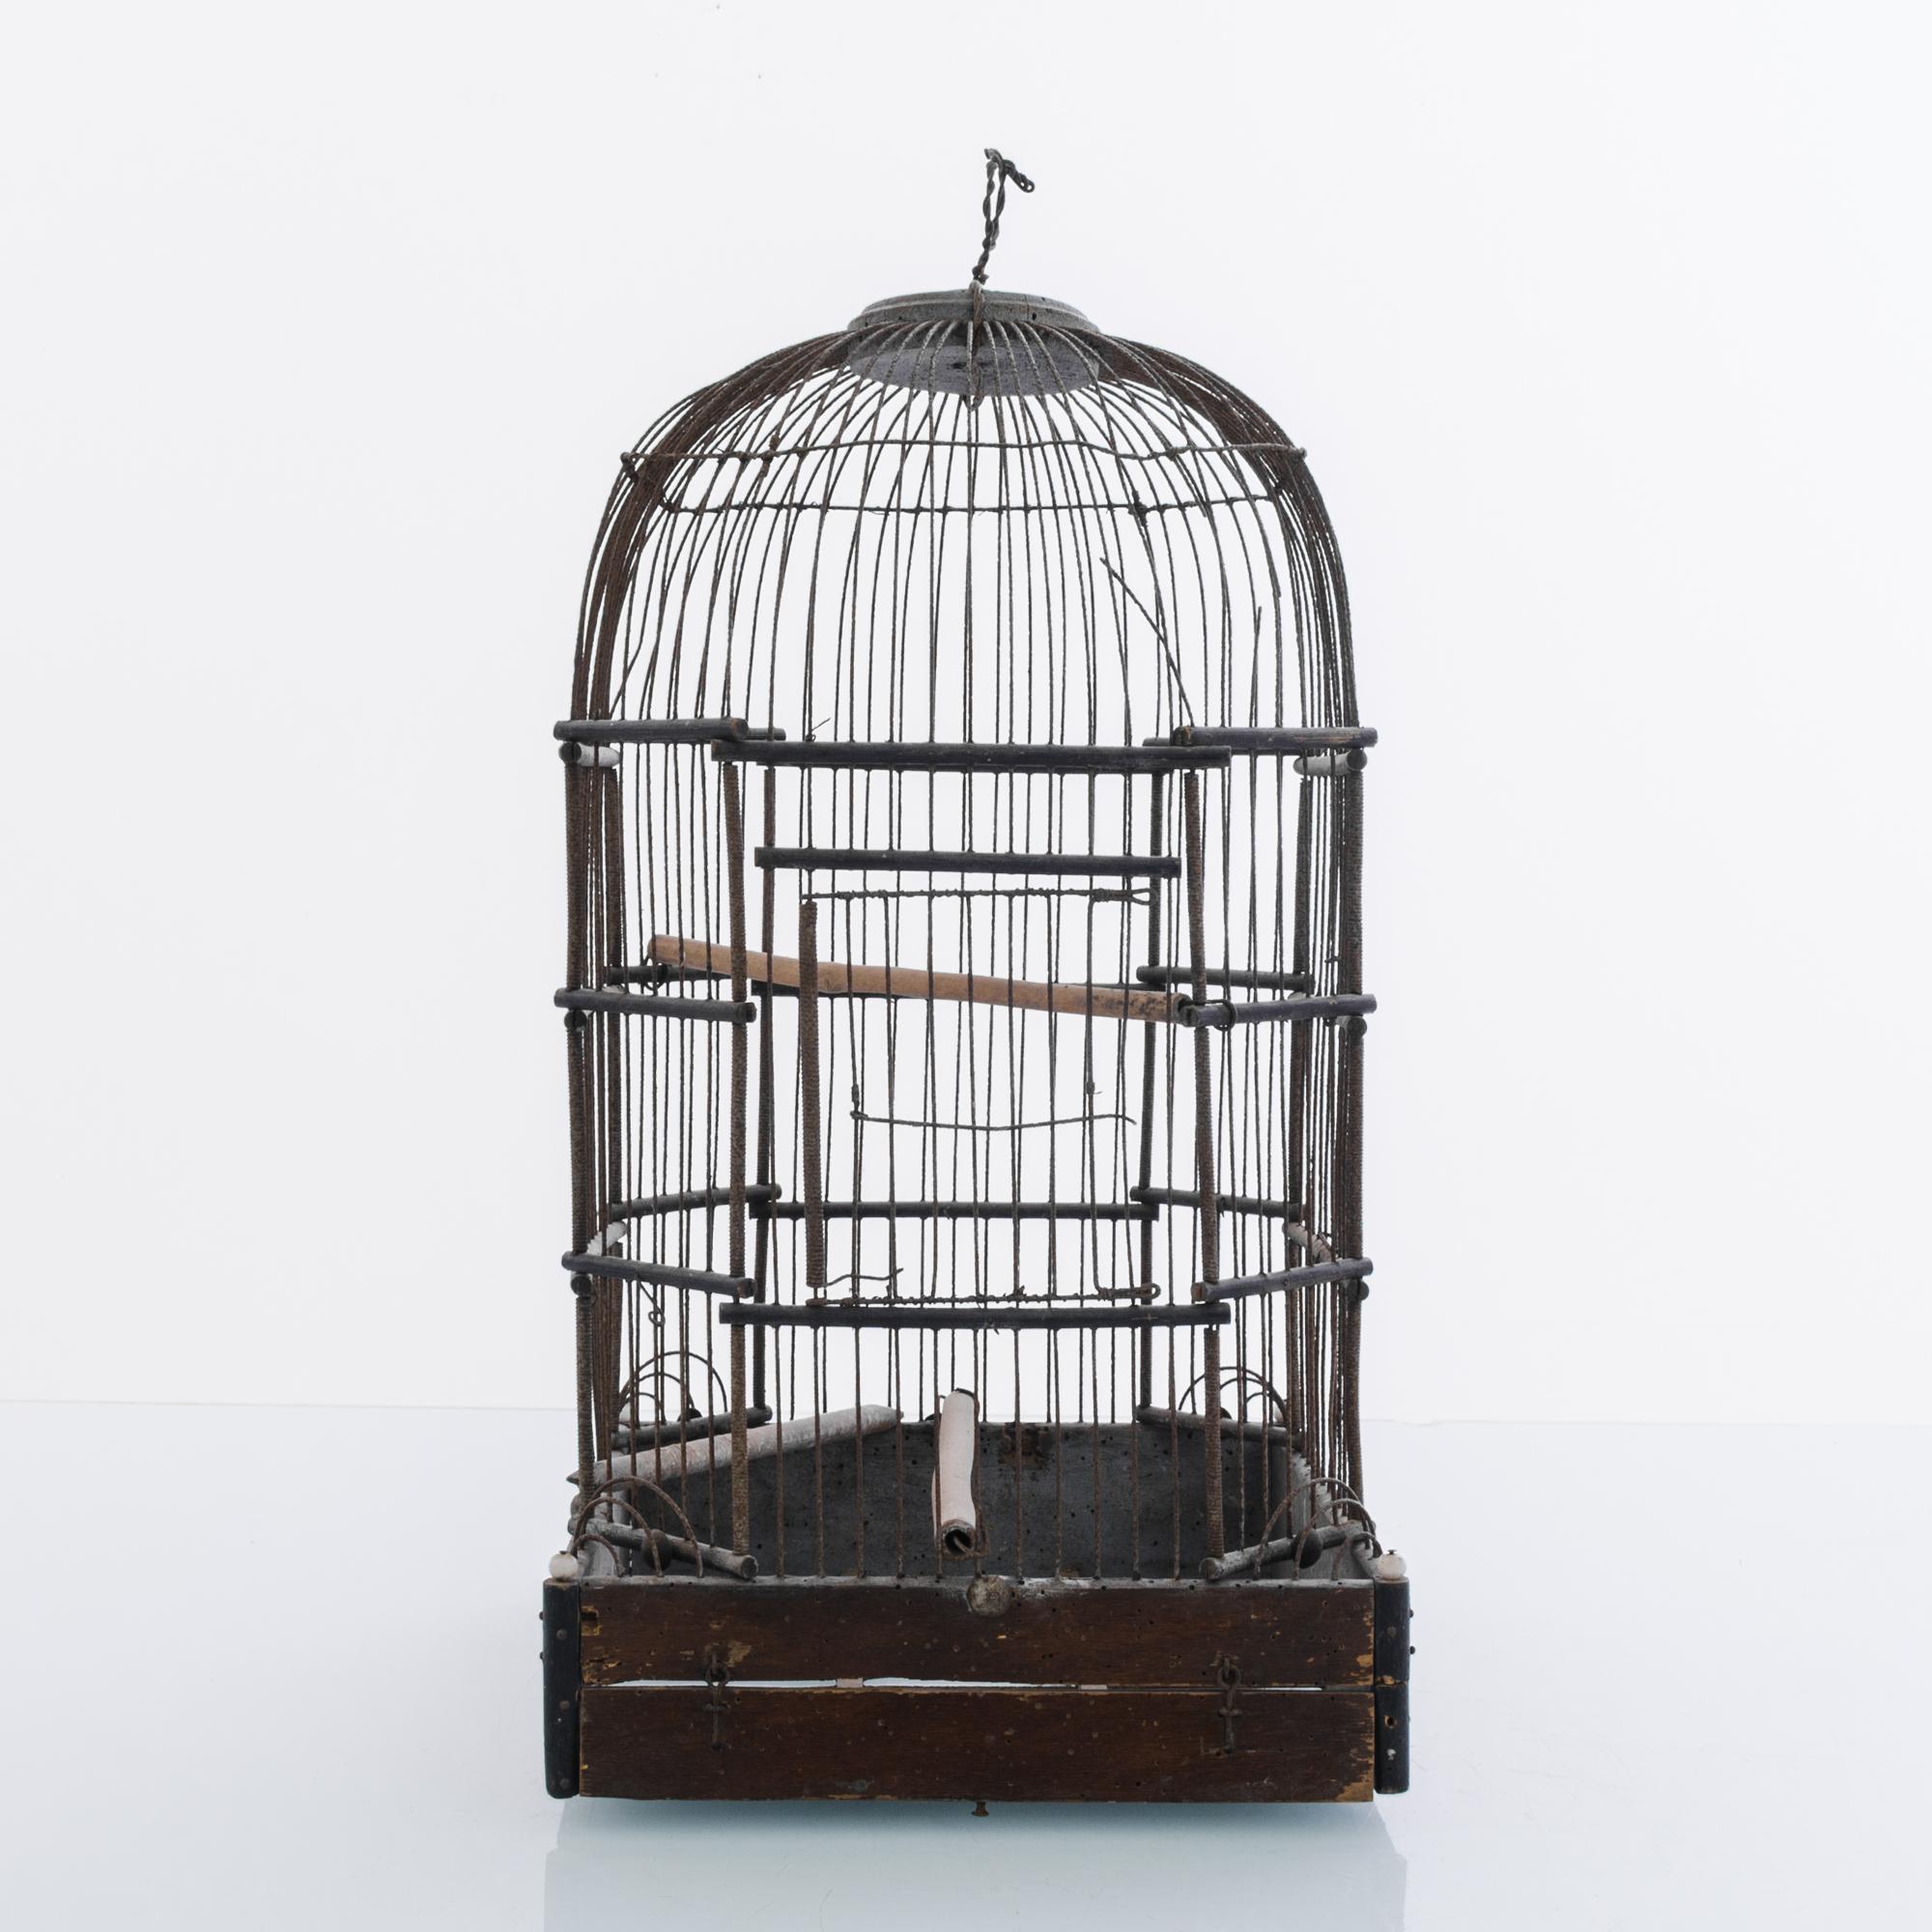 This metal birdcage with a square wooden base was made in France, circa 1920. Corrugated and smooth rods alongside thin wires were used to construct the cage, which features a dome top. Light brown wooden perches are fitted in the center and at the